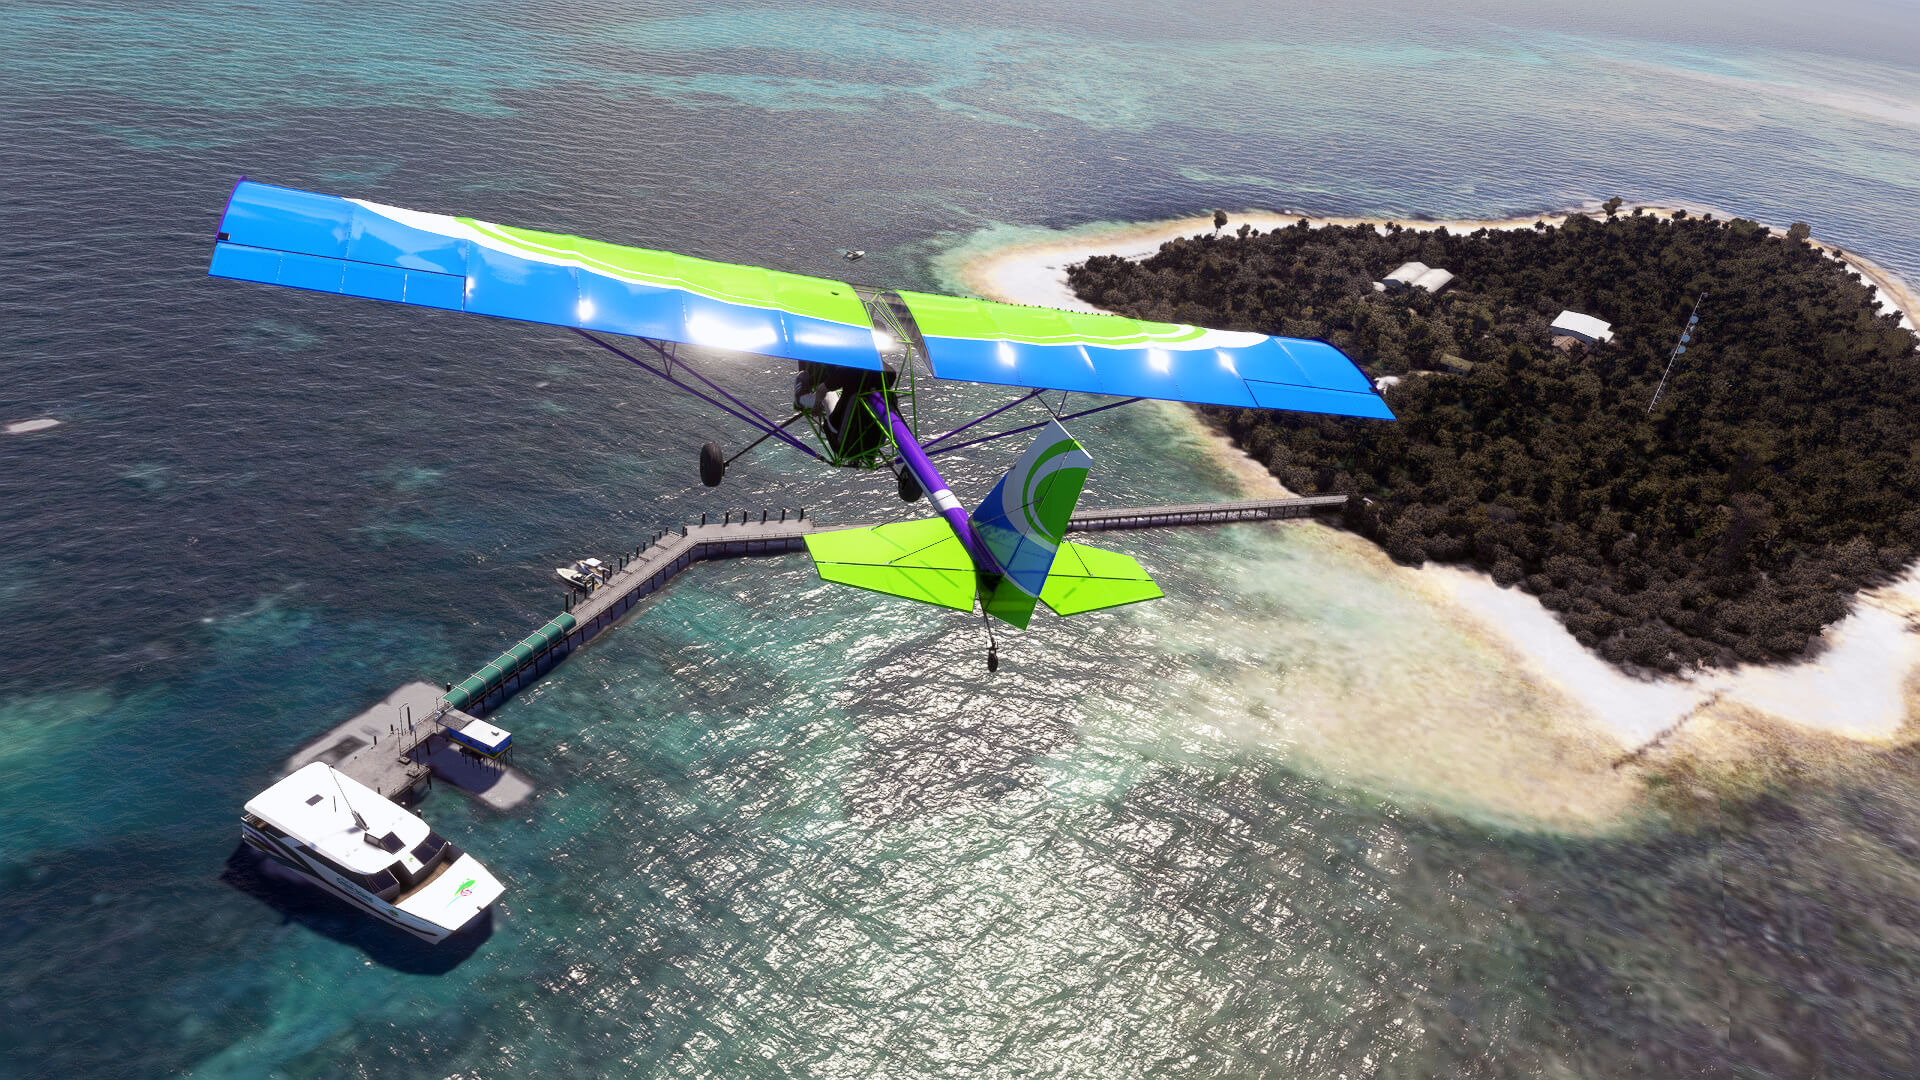 A blue and green general aviation aircraft flies over an island marina, with a yacht moored up.